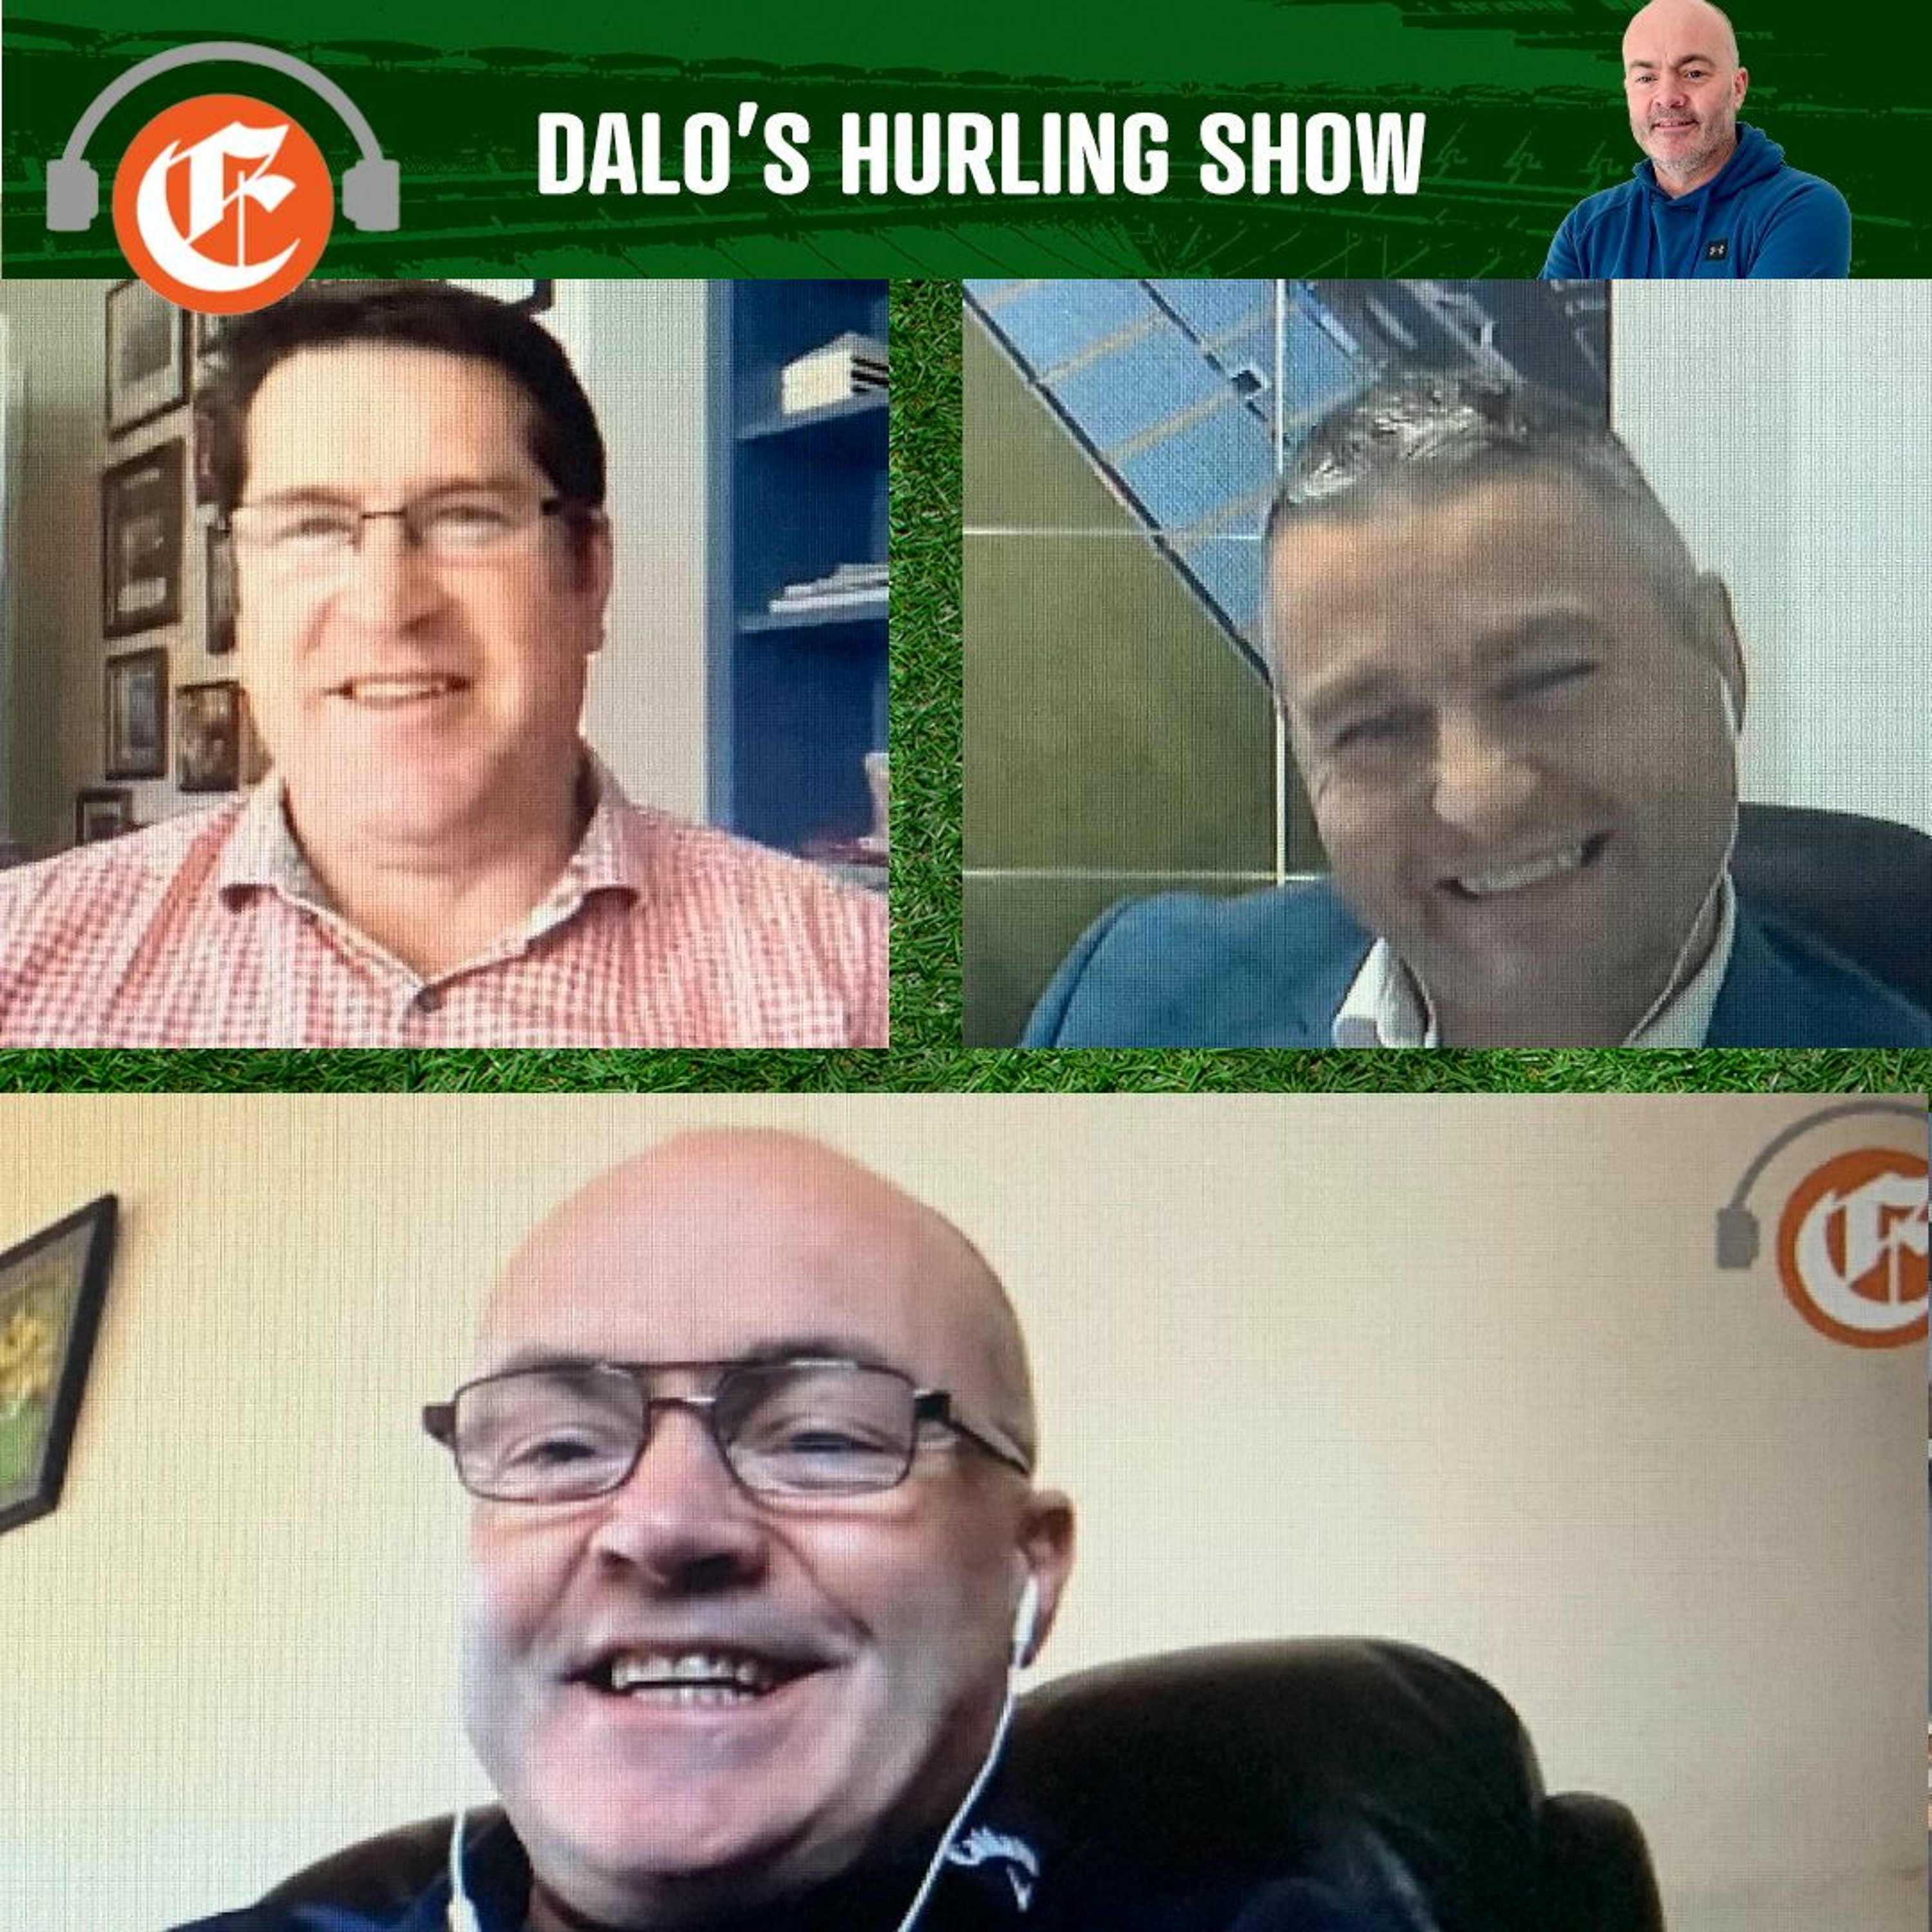 Dalo's Hurling Show: Tony Kelly coach in waiting, Master McGrath & a drop of red at captain's table